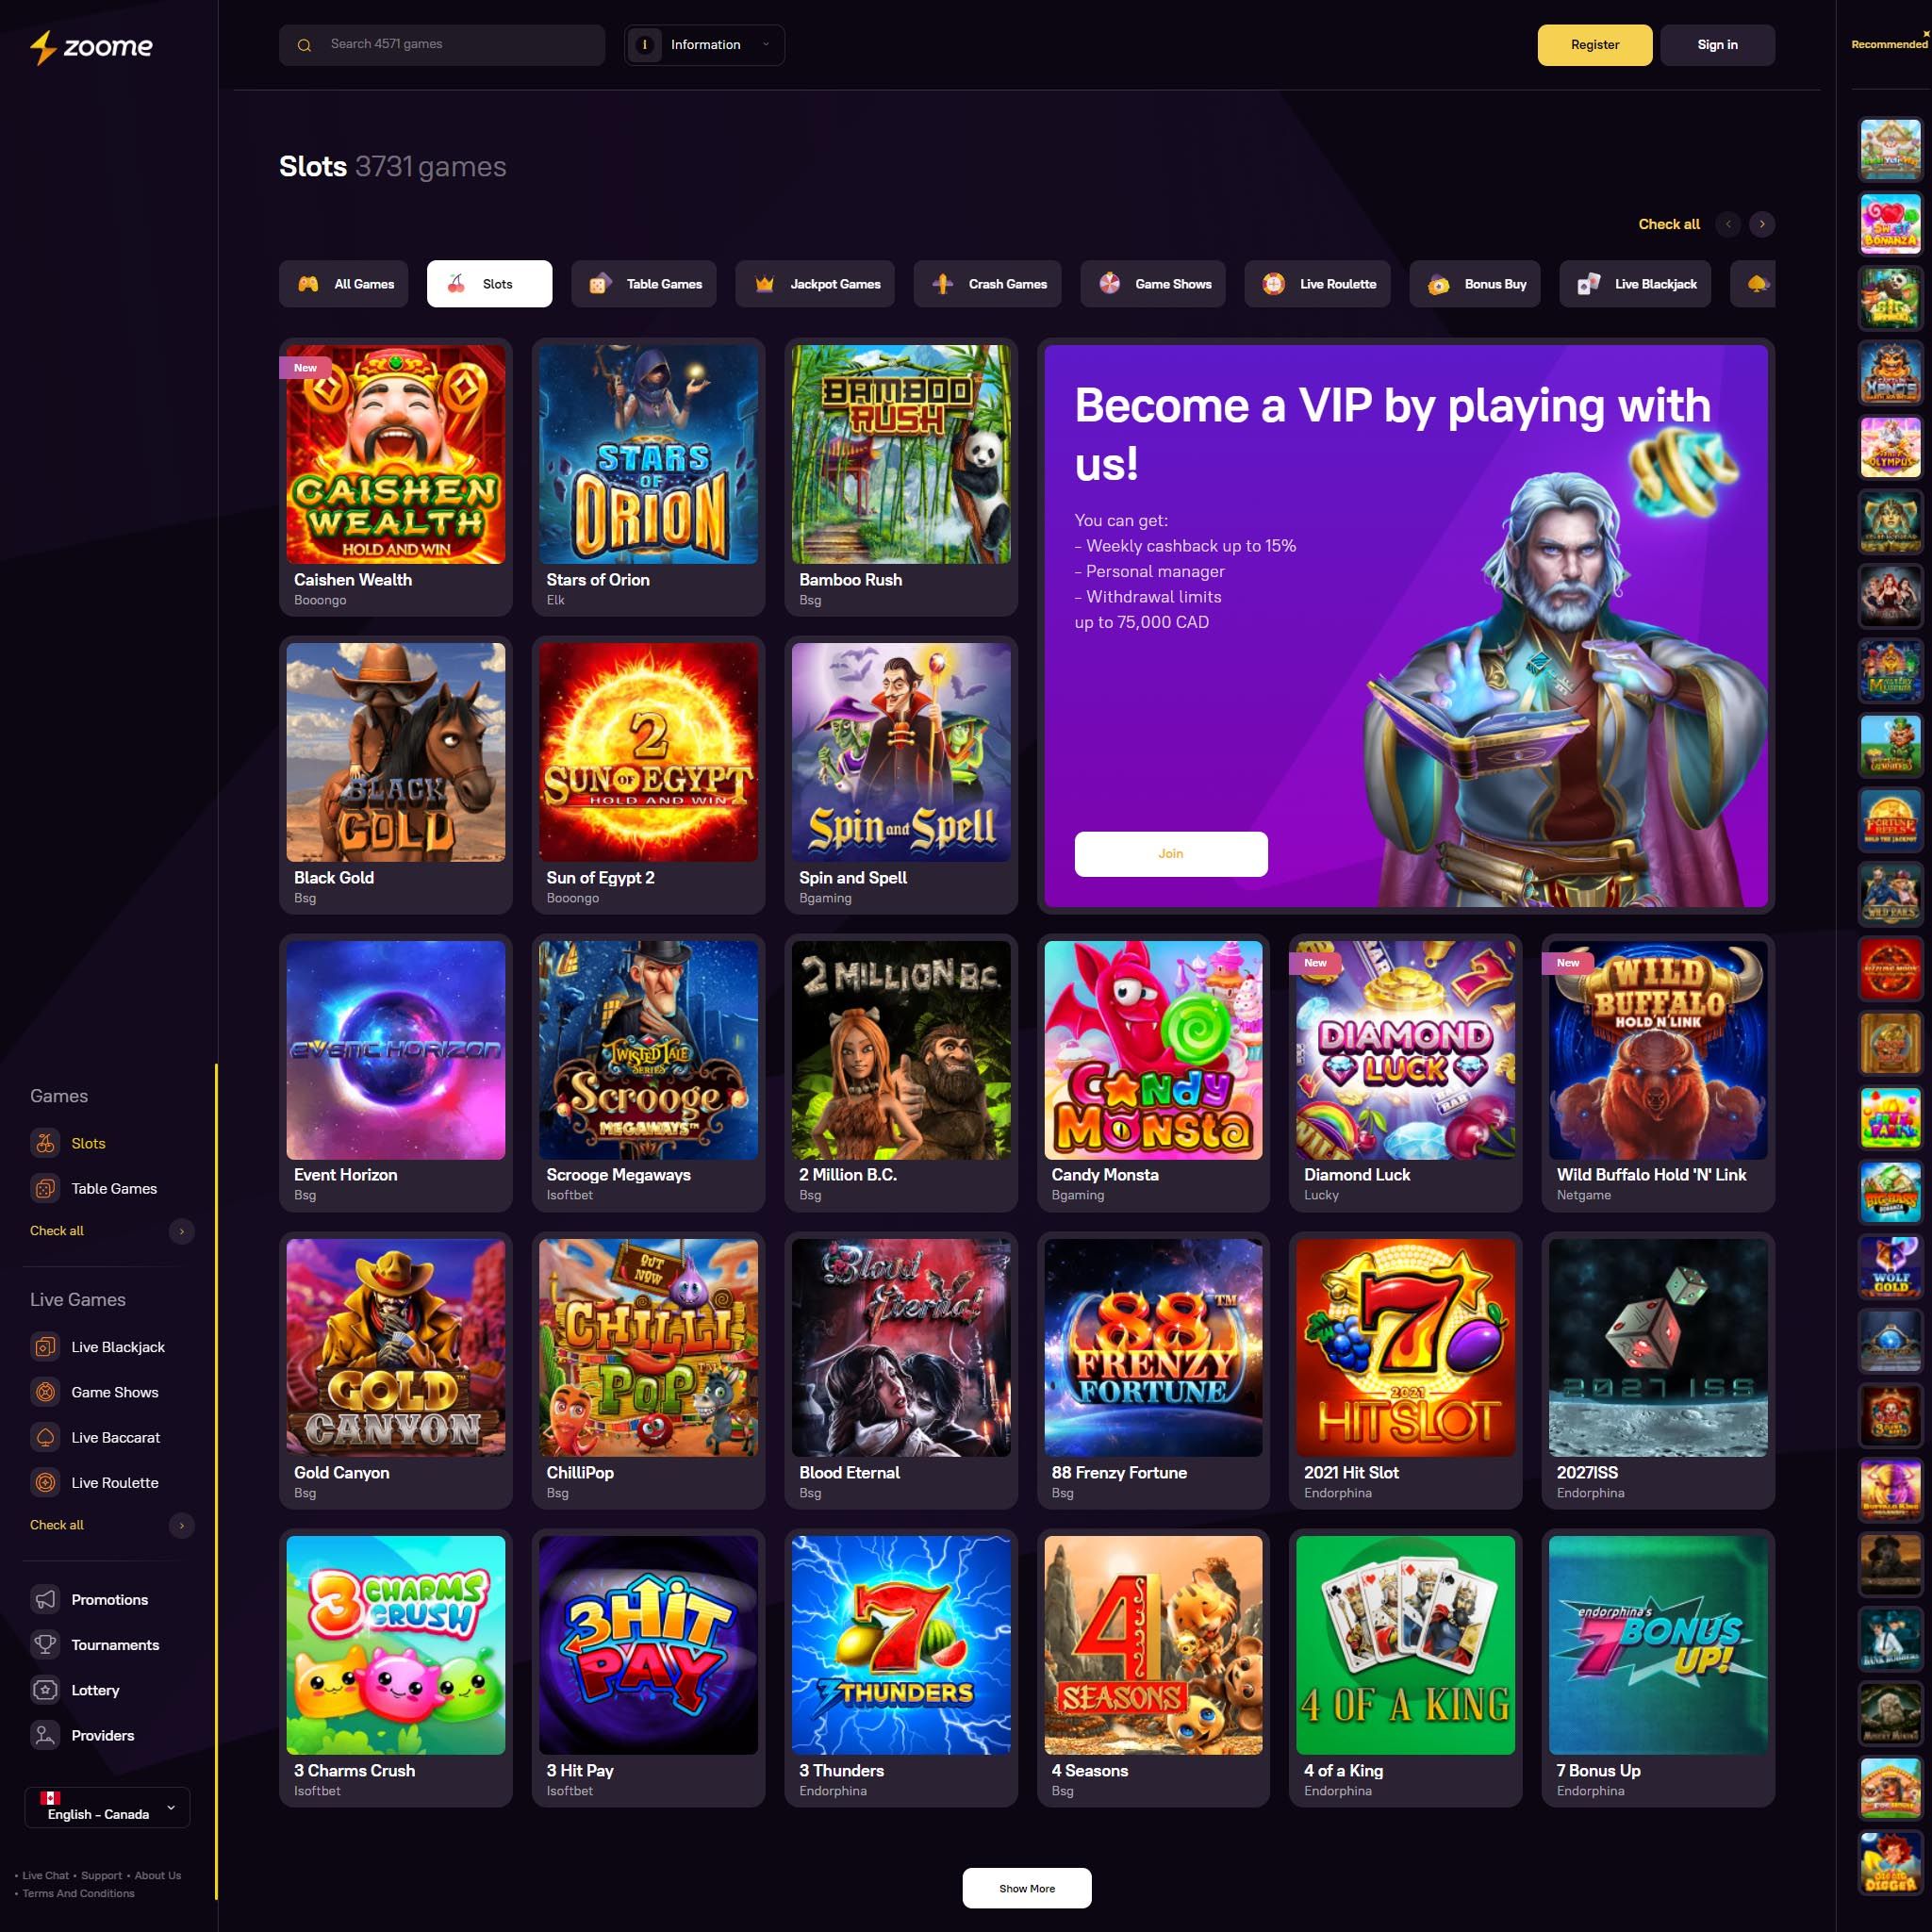 Zoome Casino full games catalogue